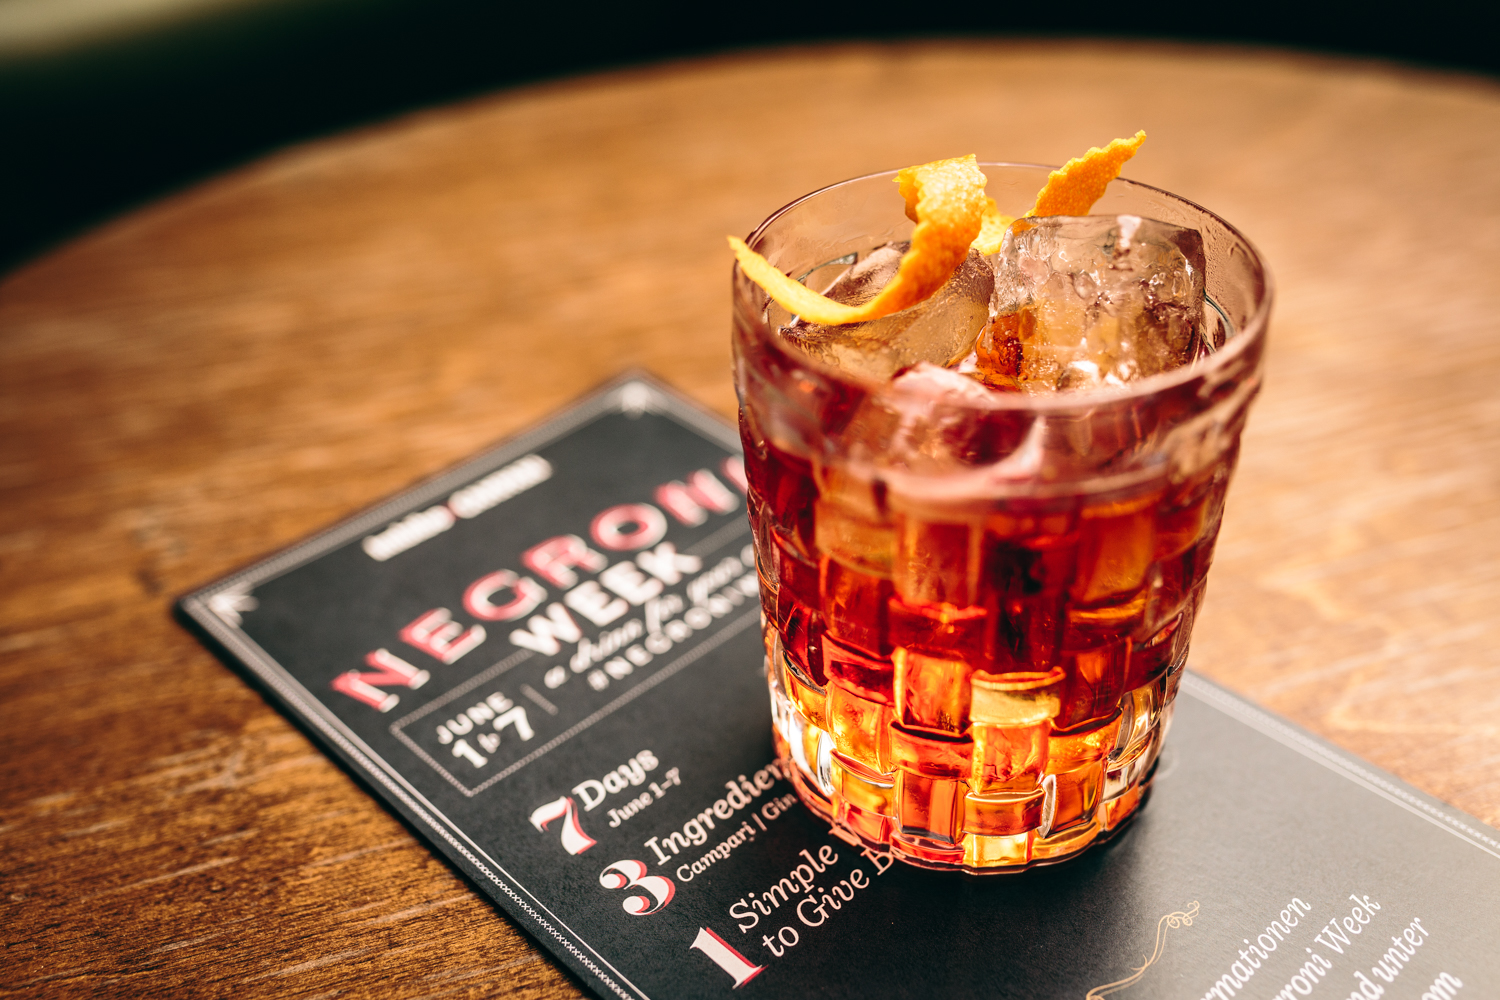  NEGRONI WEEK 2016: THERES NO CHEERS WITHOUT A CAUSE